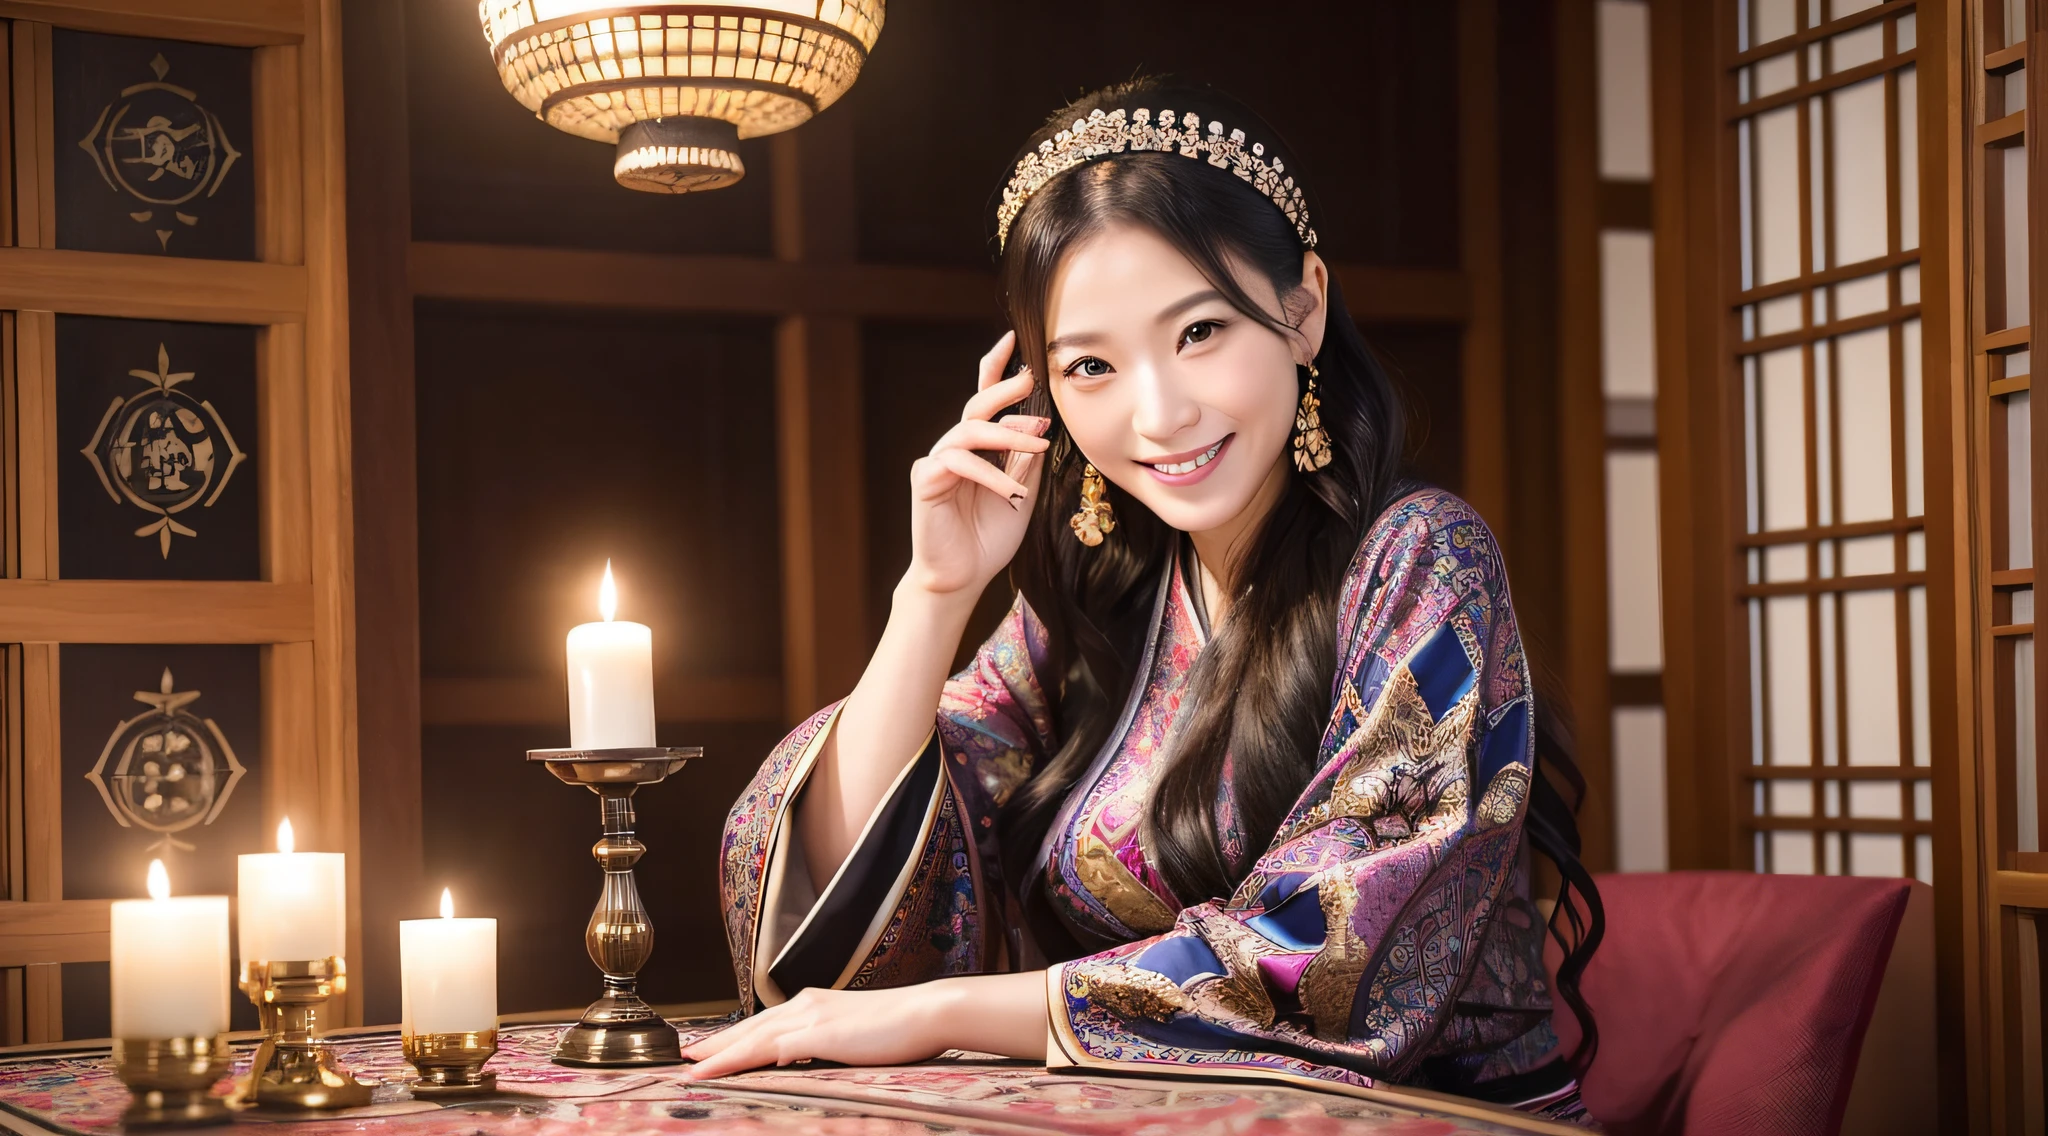 40-year-old woman Japan man, very beautiful woman, quietly smiling fortune teller, dressed in Western fortune teller, sitting in fortune telling room, tarot cards and candles on the table.